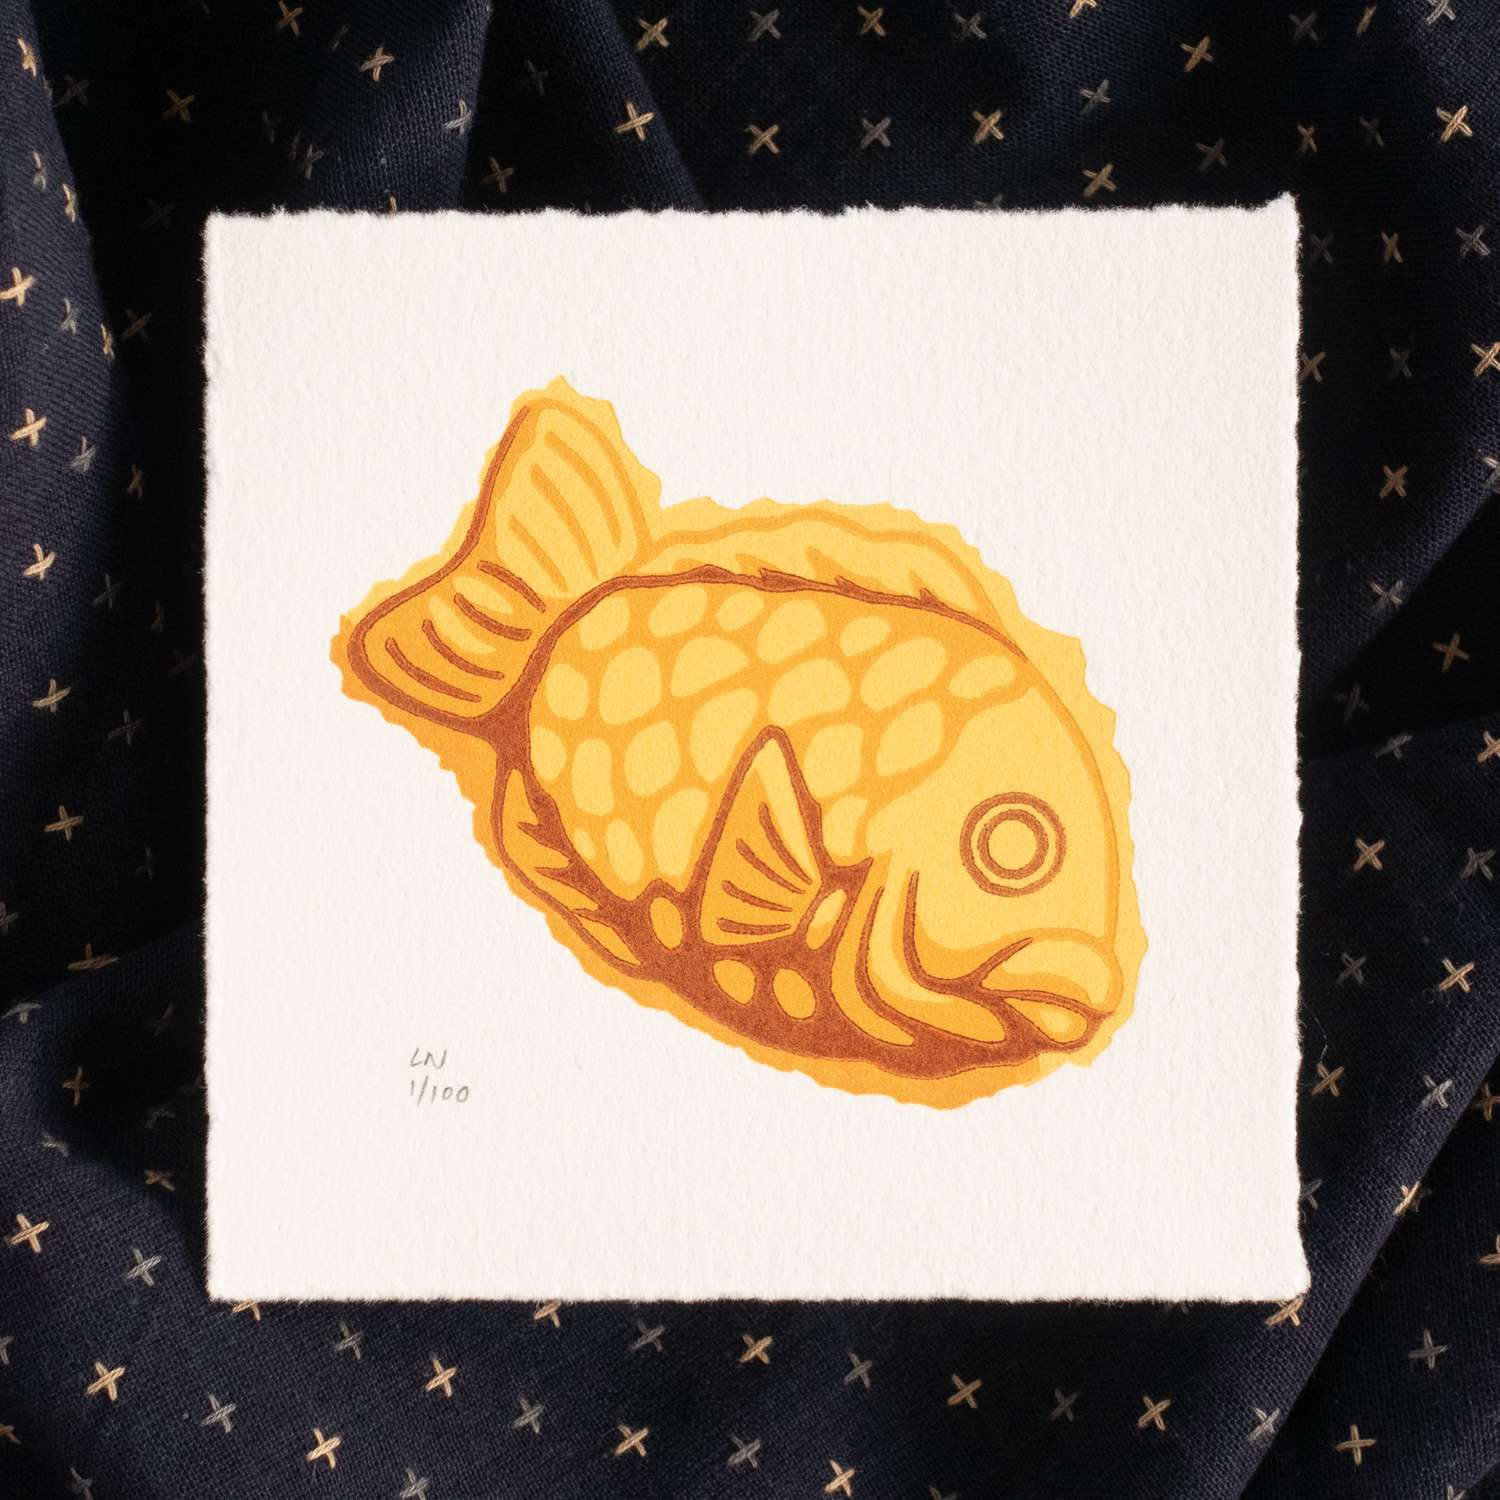 A square piece of paper depicting a taiyaki - a yellow/orange fish shape seen side-on, looking to the right. The print is signed in the bottom left corner. The print sits on crumpled navy fabric with light-colored checks.